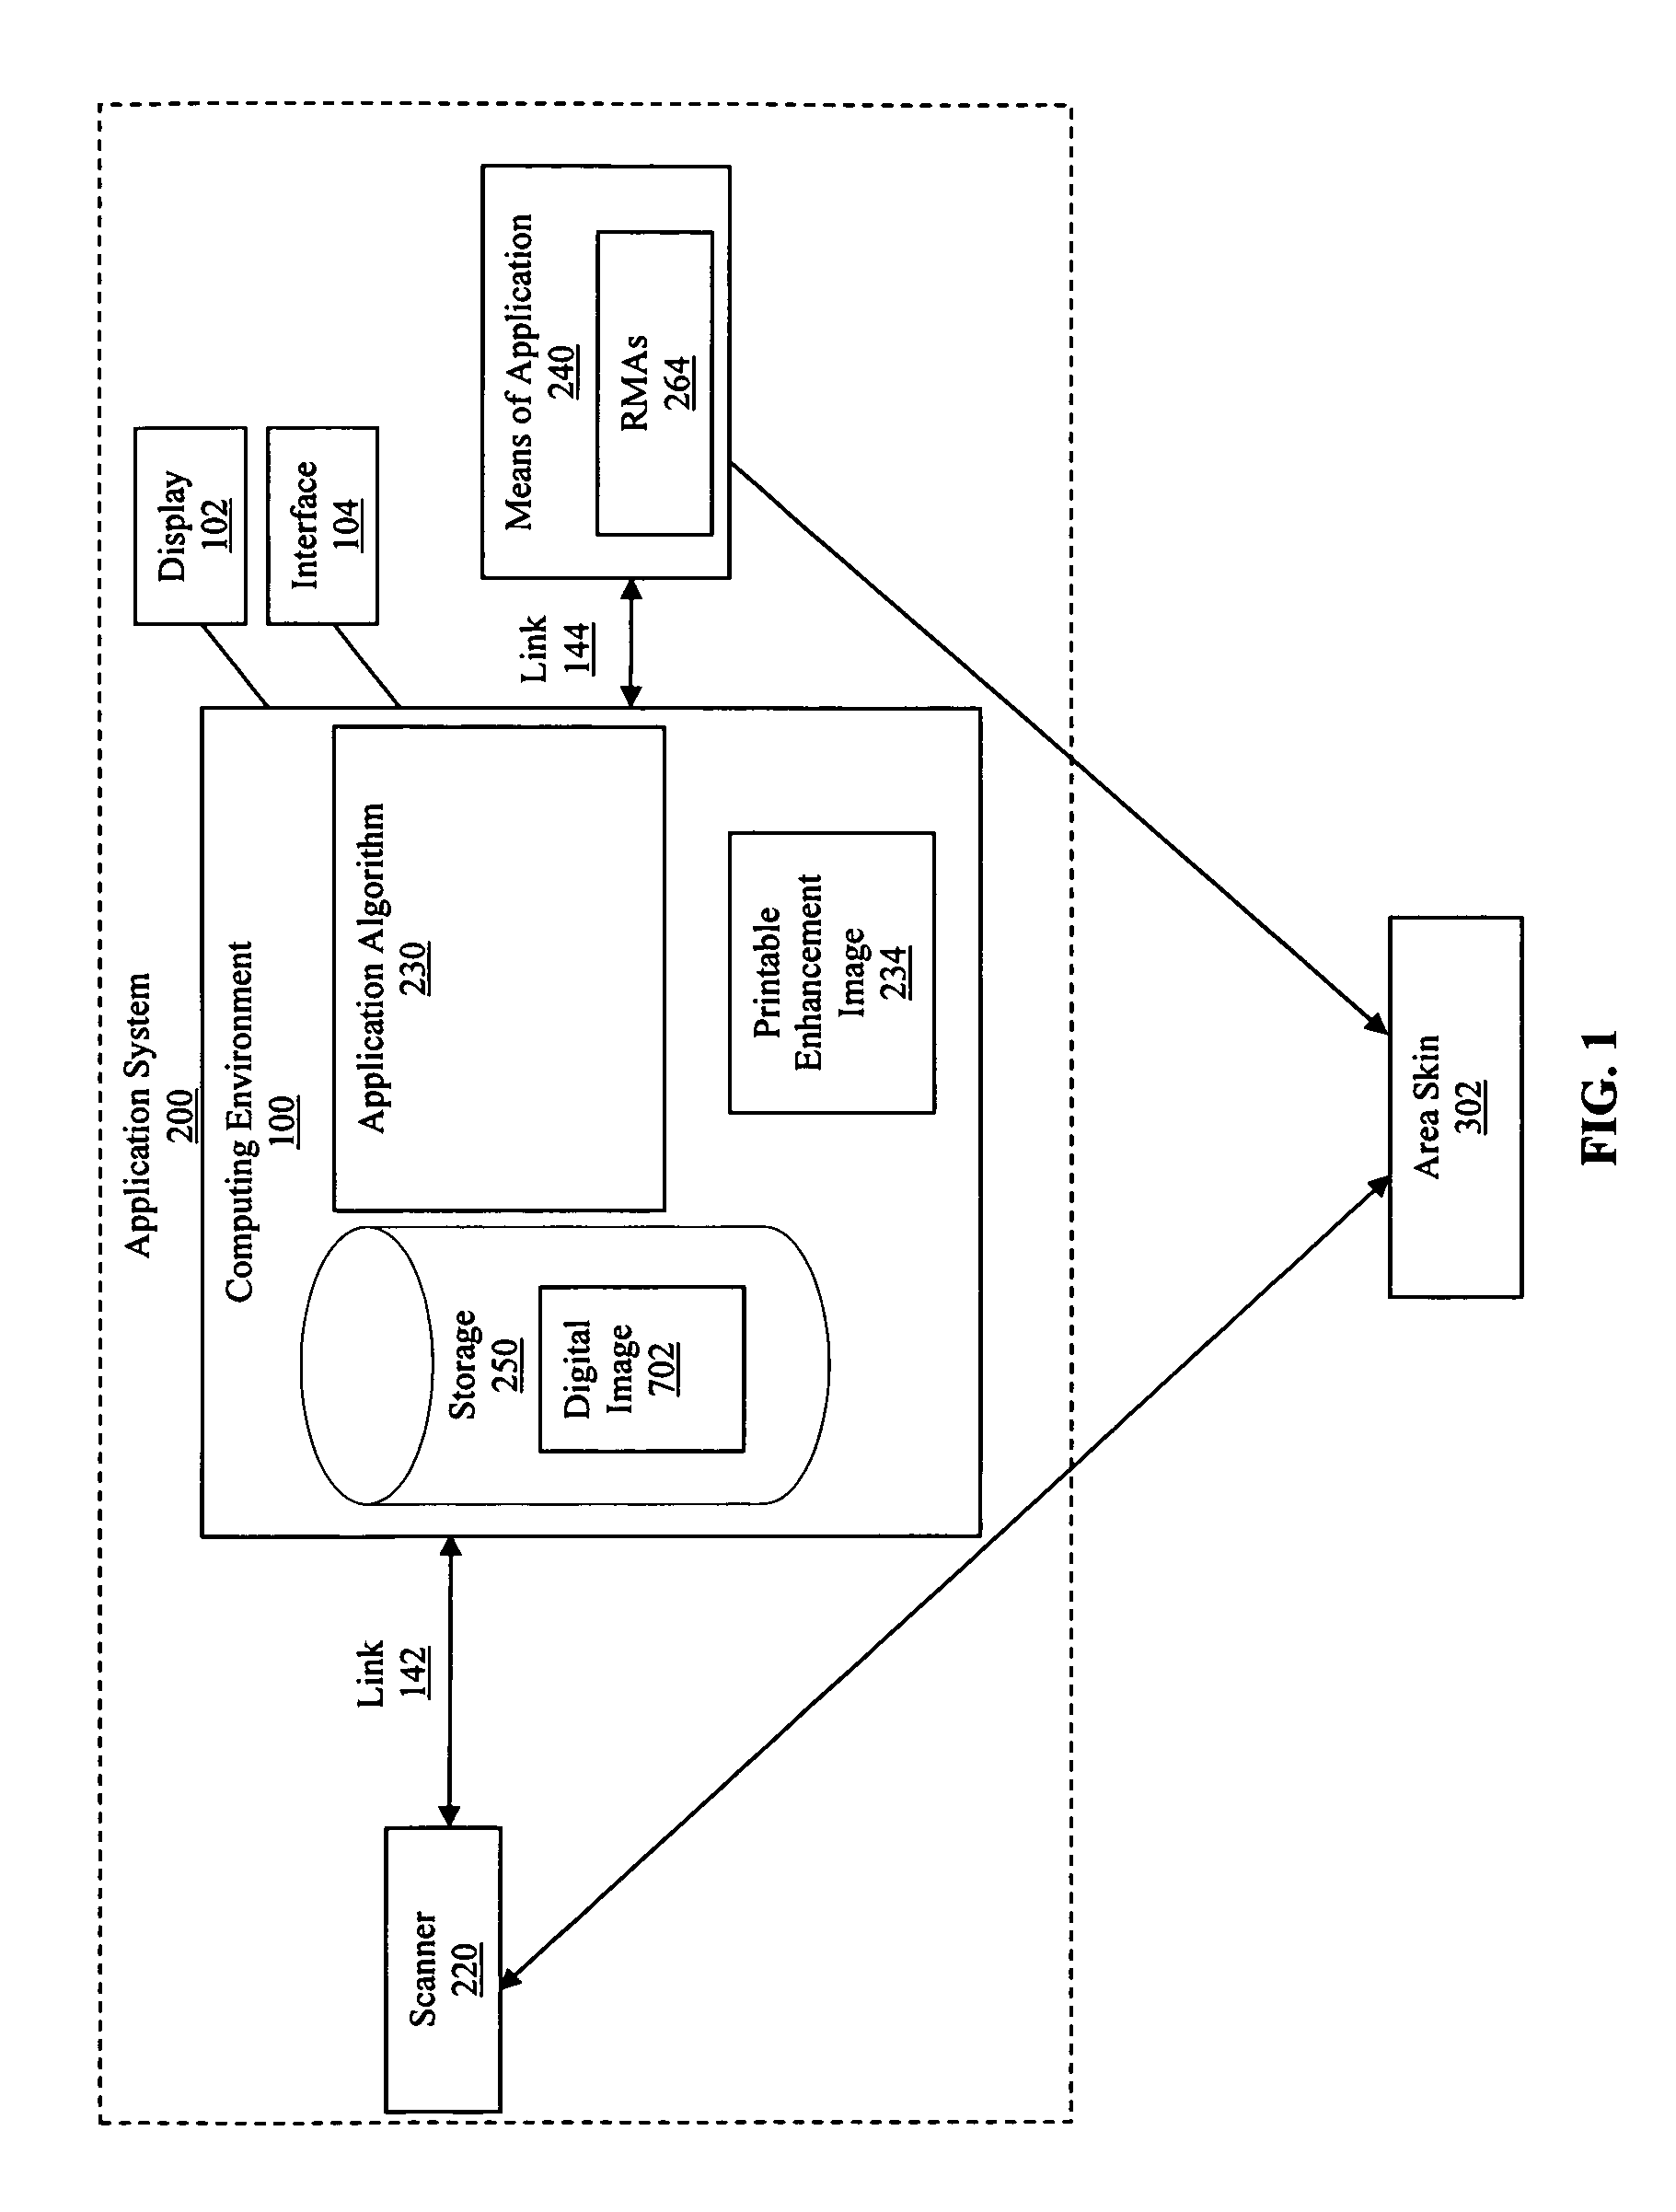 System and method for applying a reflectance modifying agent to change a person's appearance based on a digital image